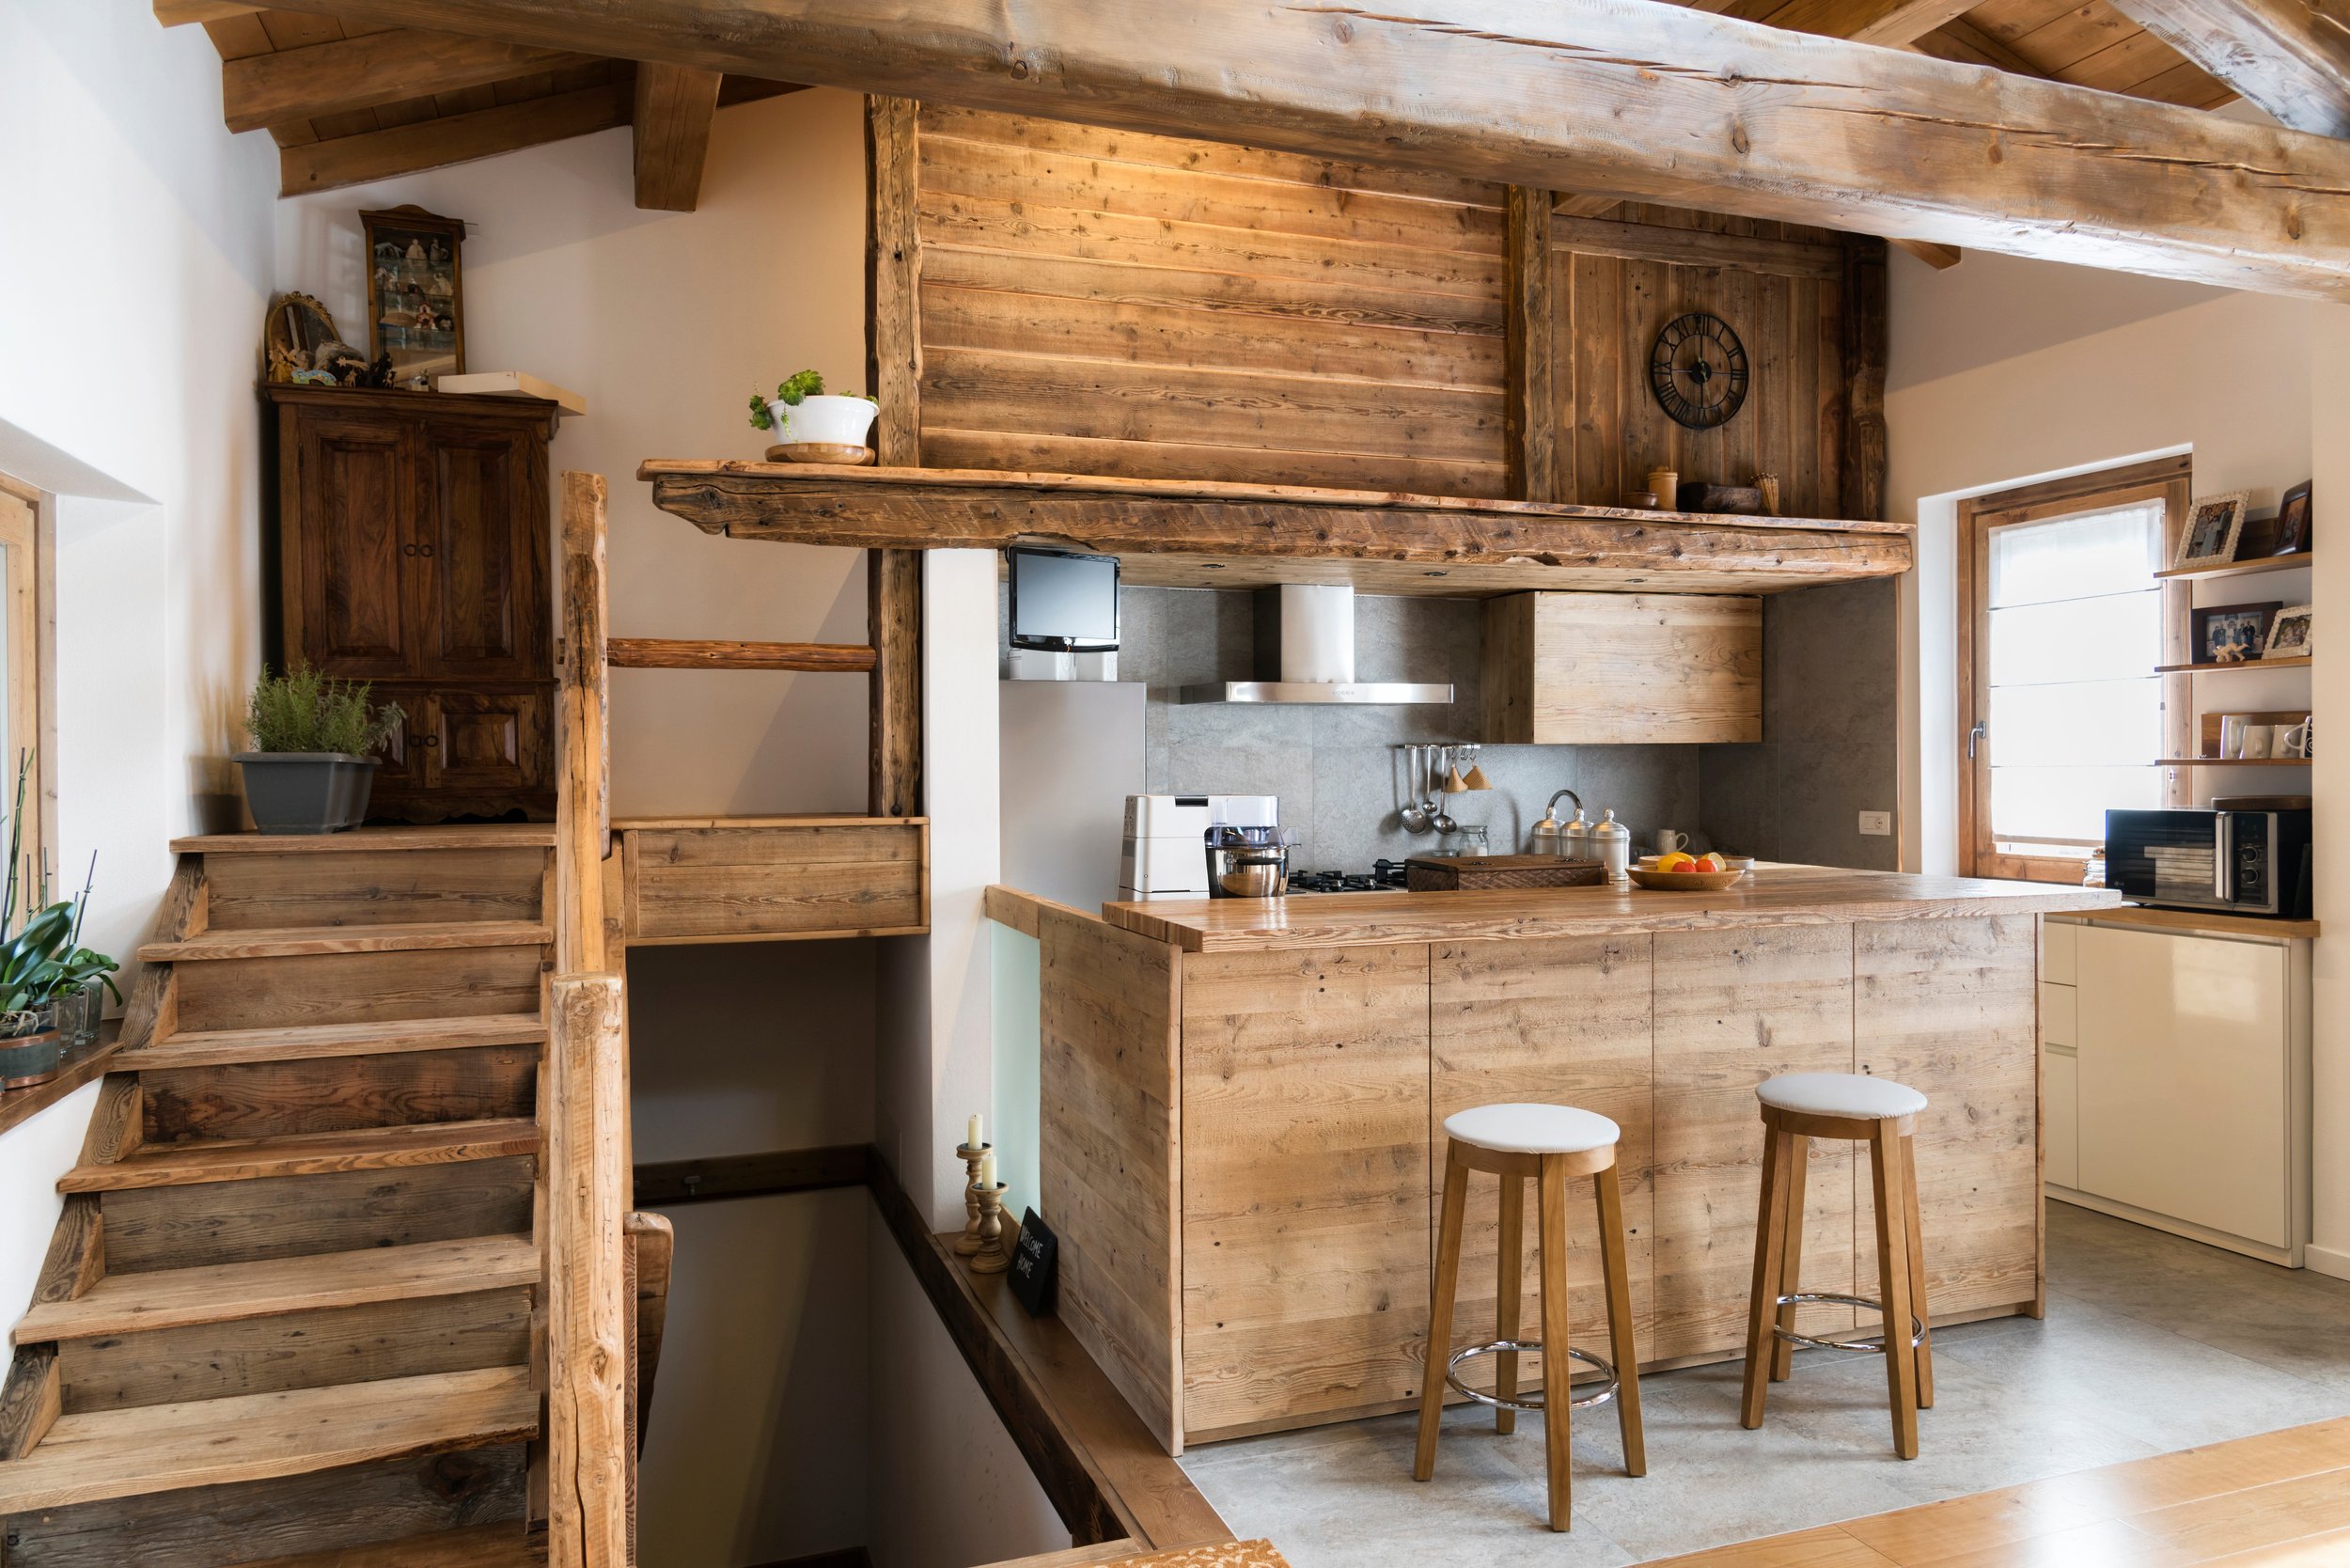 8-ways-to-use-reclaimed-wood-in-your-home-2.jpg